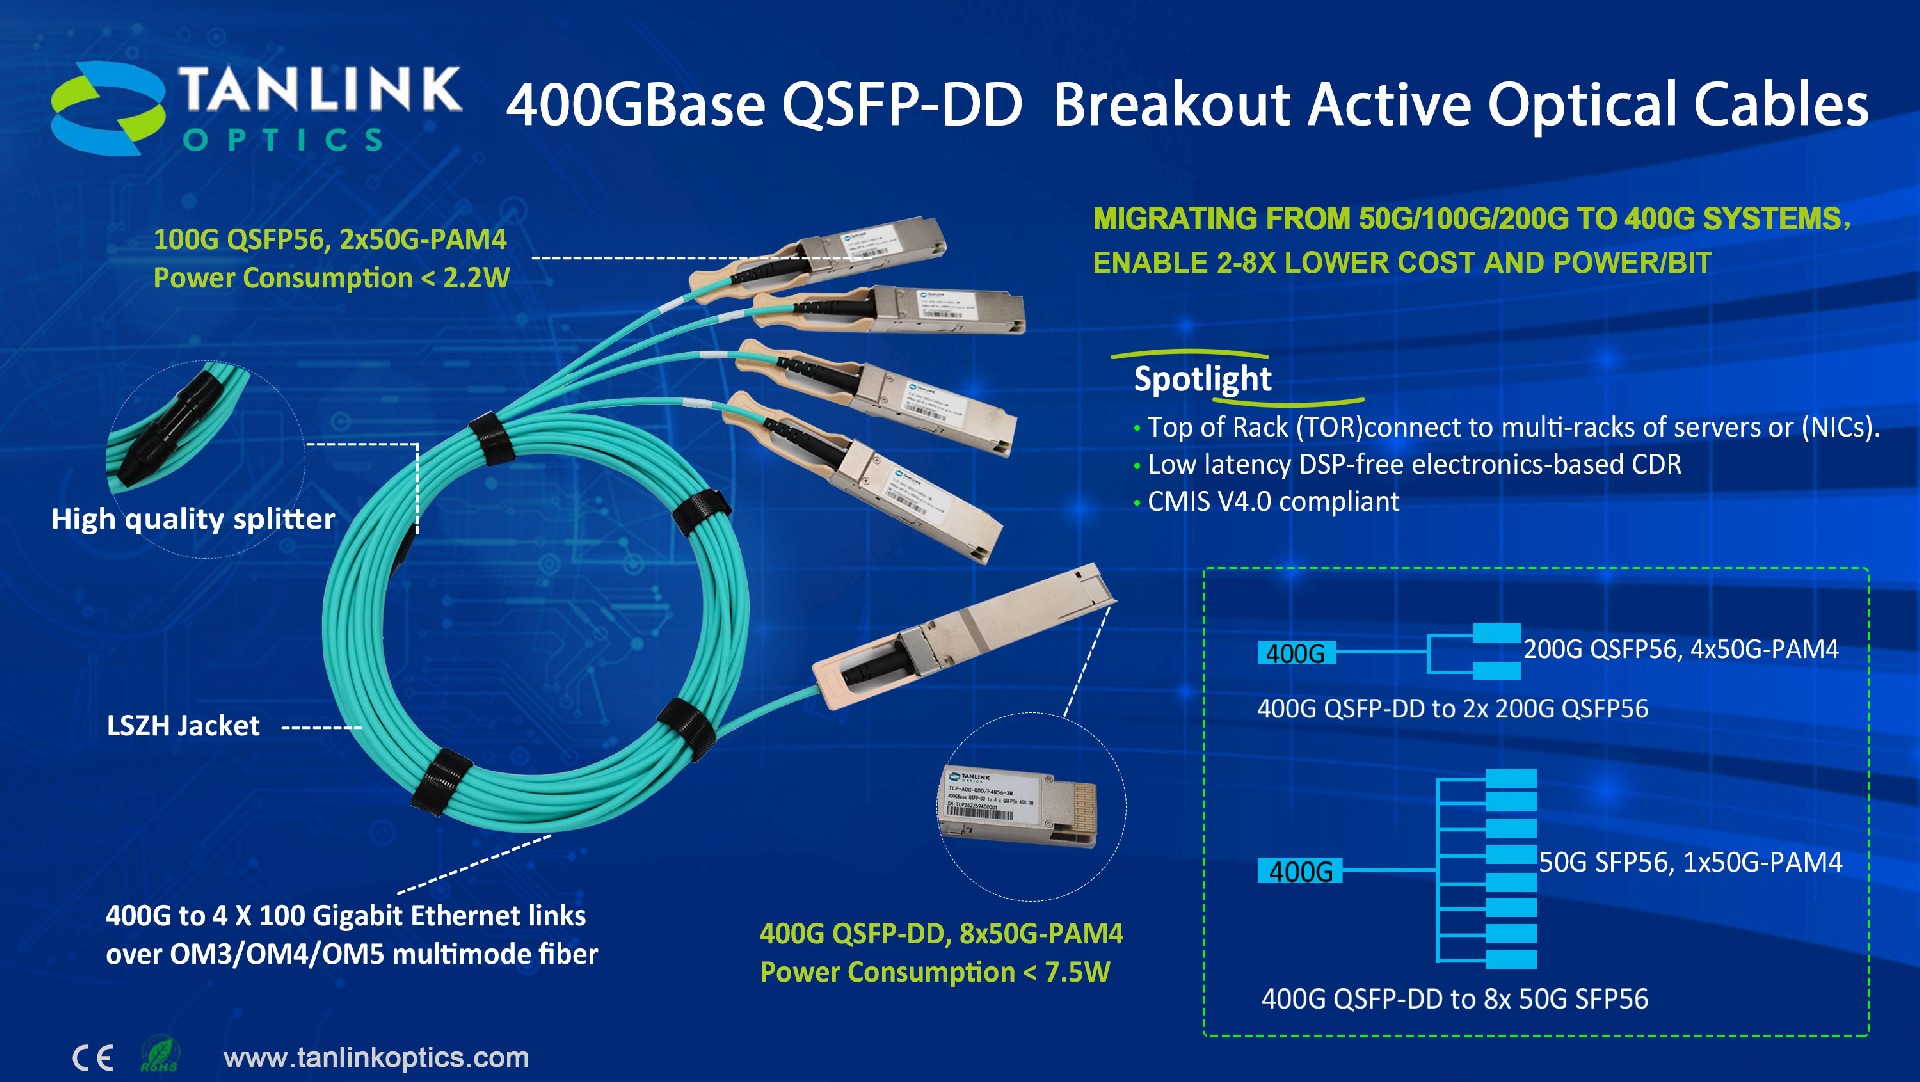 400G QSFP-DD BREAKOUT AOC CABLE WITH DSP-FREE CDR